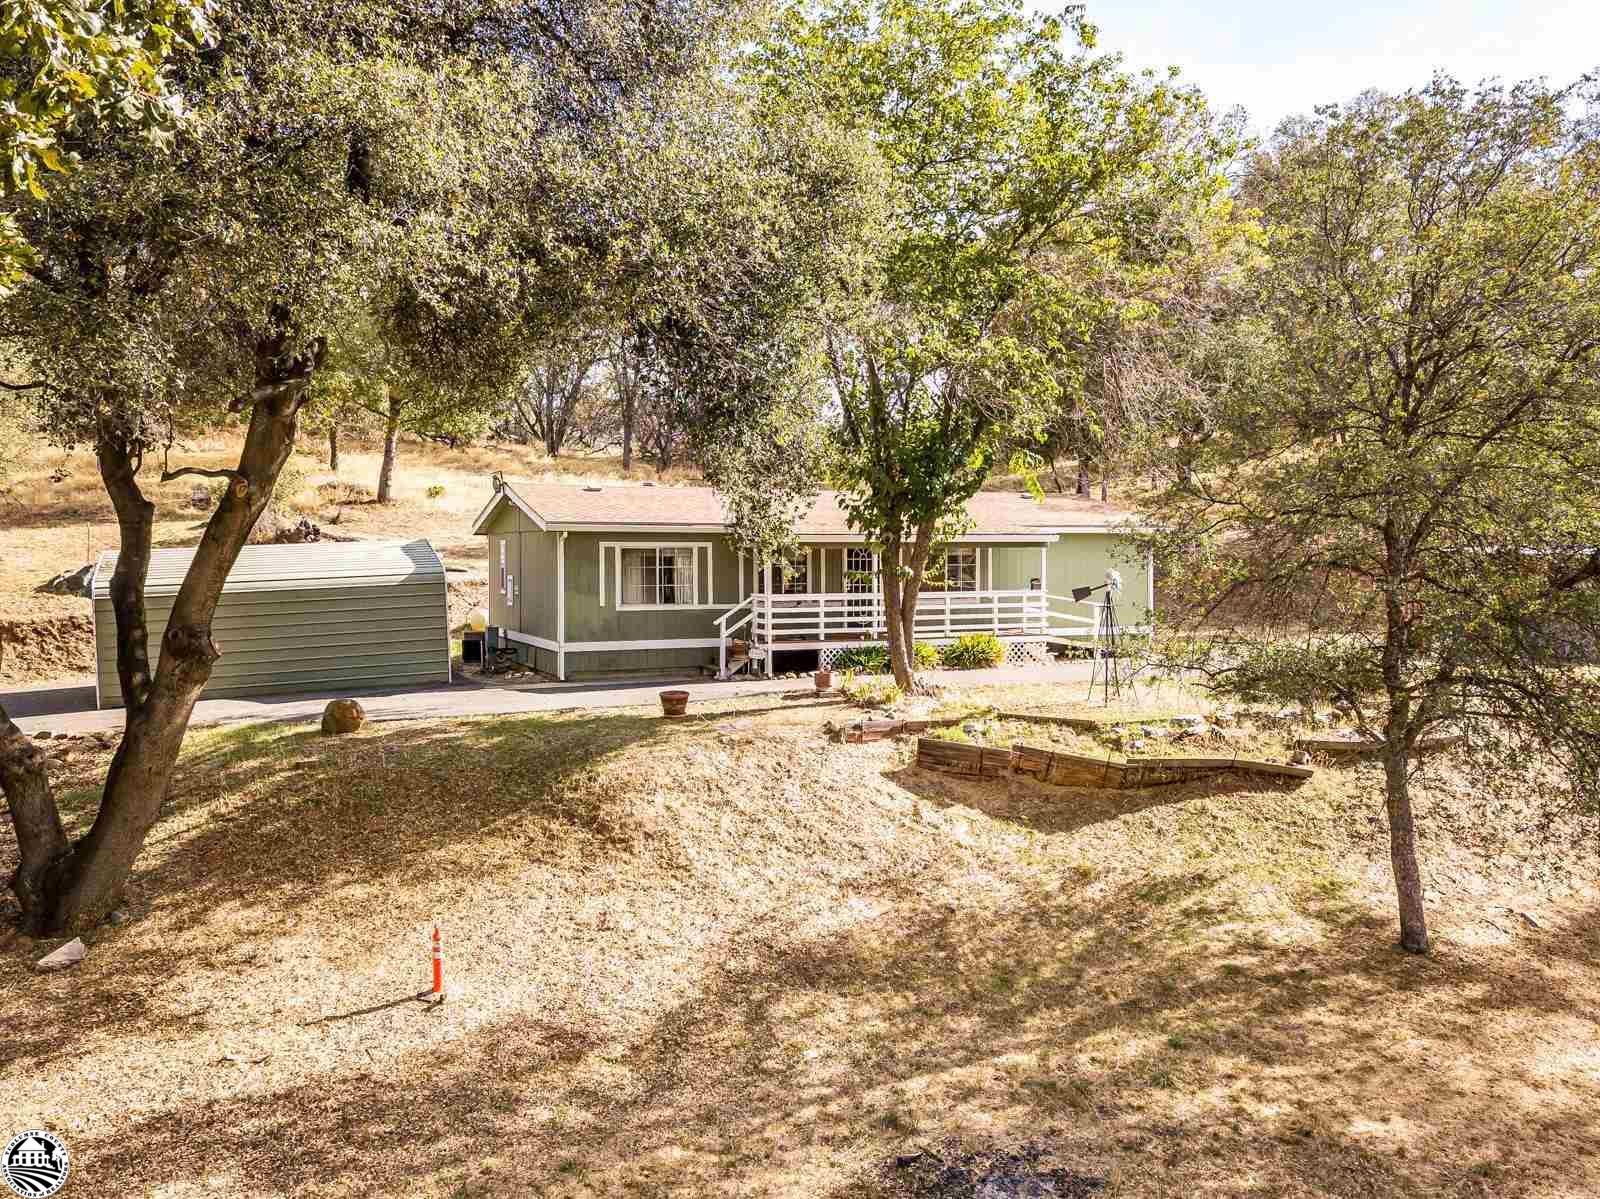 Here is your chance to own your own Sierra Foothill Ranchette with 2 acres! There is a nice detached shop, level parking and a paved RV parking pad. There is even a ramp for access if needed! The location is nice as you are close to shopping, Sonora, Twain Harte and Black Oak Casino.  It's just a short drive to Yosemite National Park, the Sonora Pass, Pinecrest and Dodge Ridge Ski Resort.  You can have Dish for Internet and TV.  This could also be a great property for those 4-H projects!  There is a third room that can be an office or a sleeping room as it does have a closet!